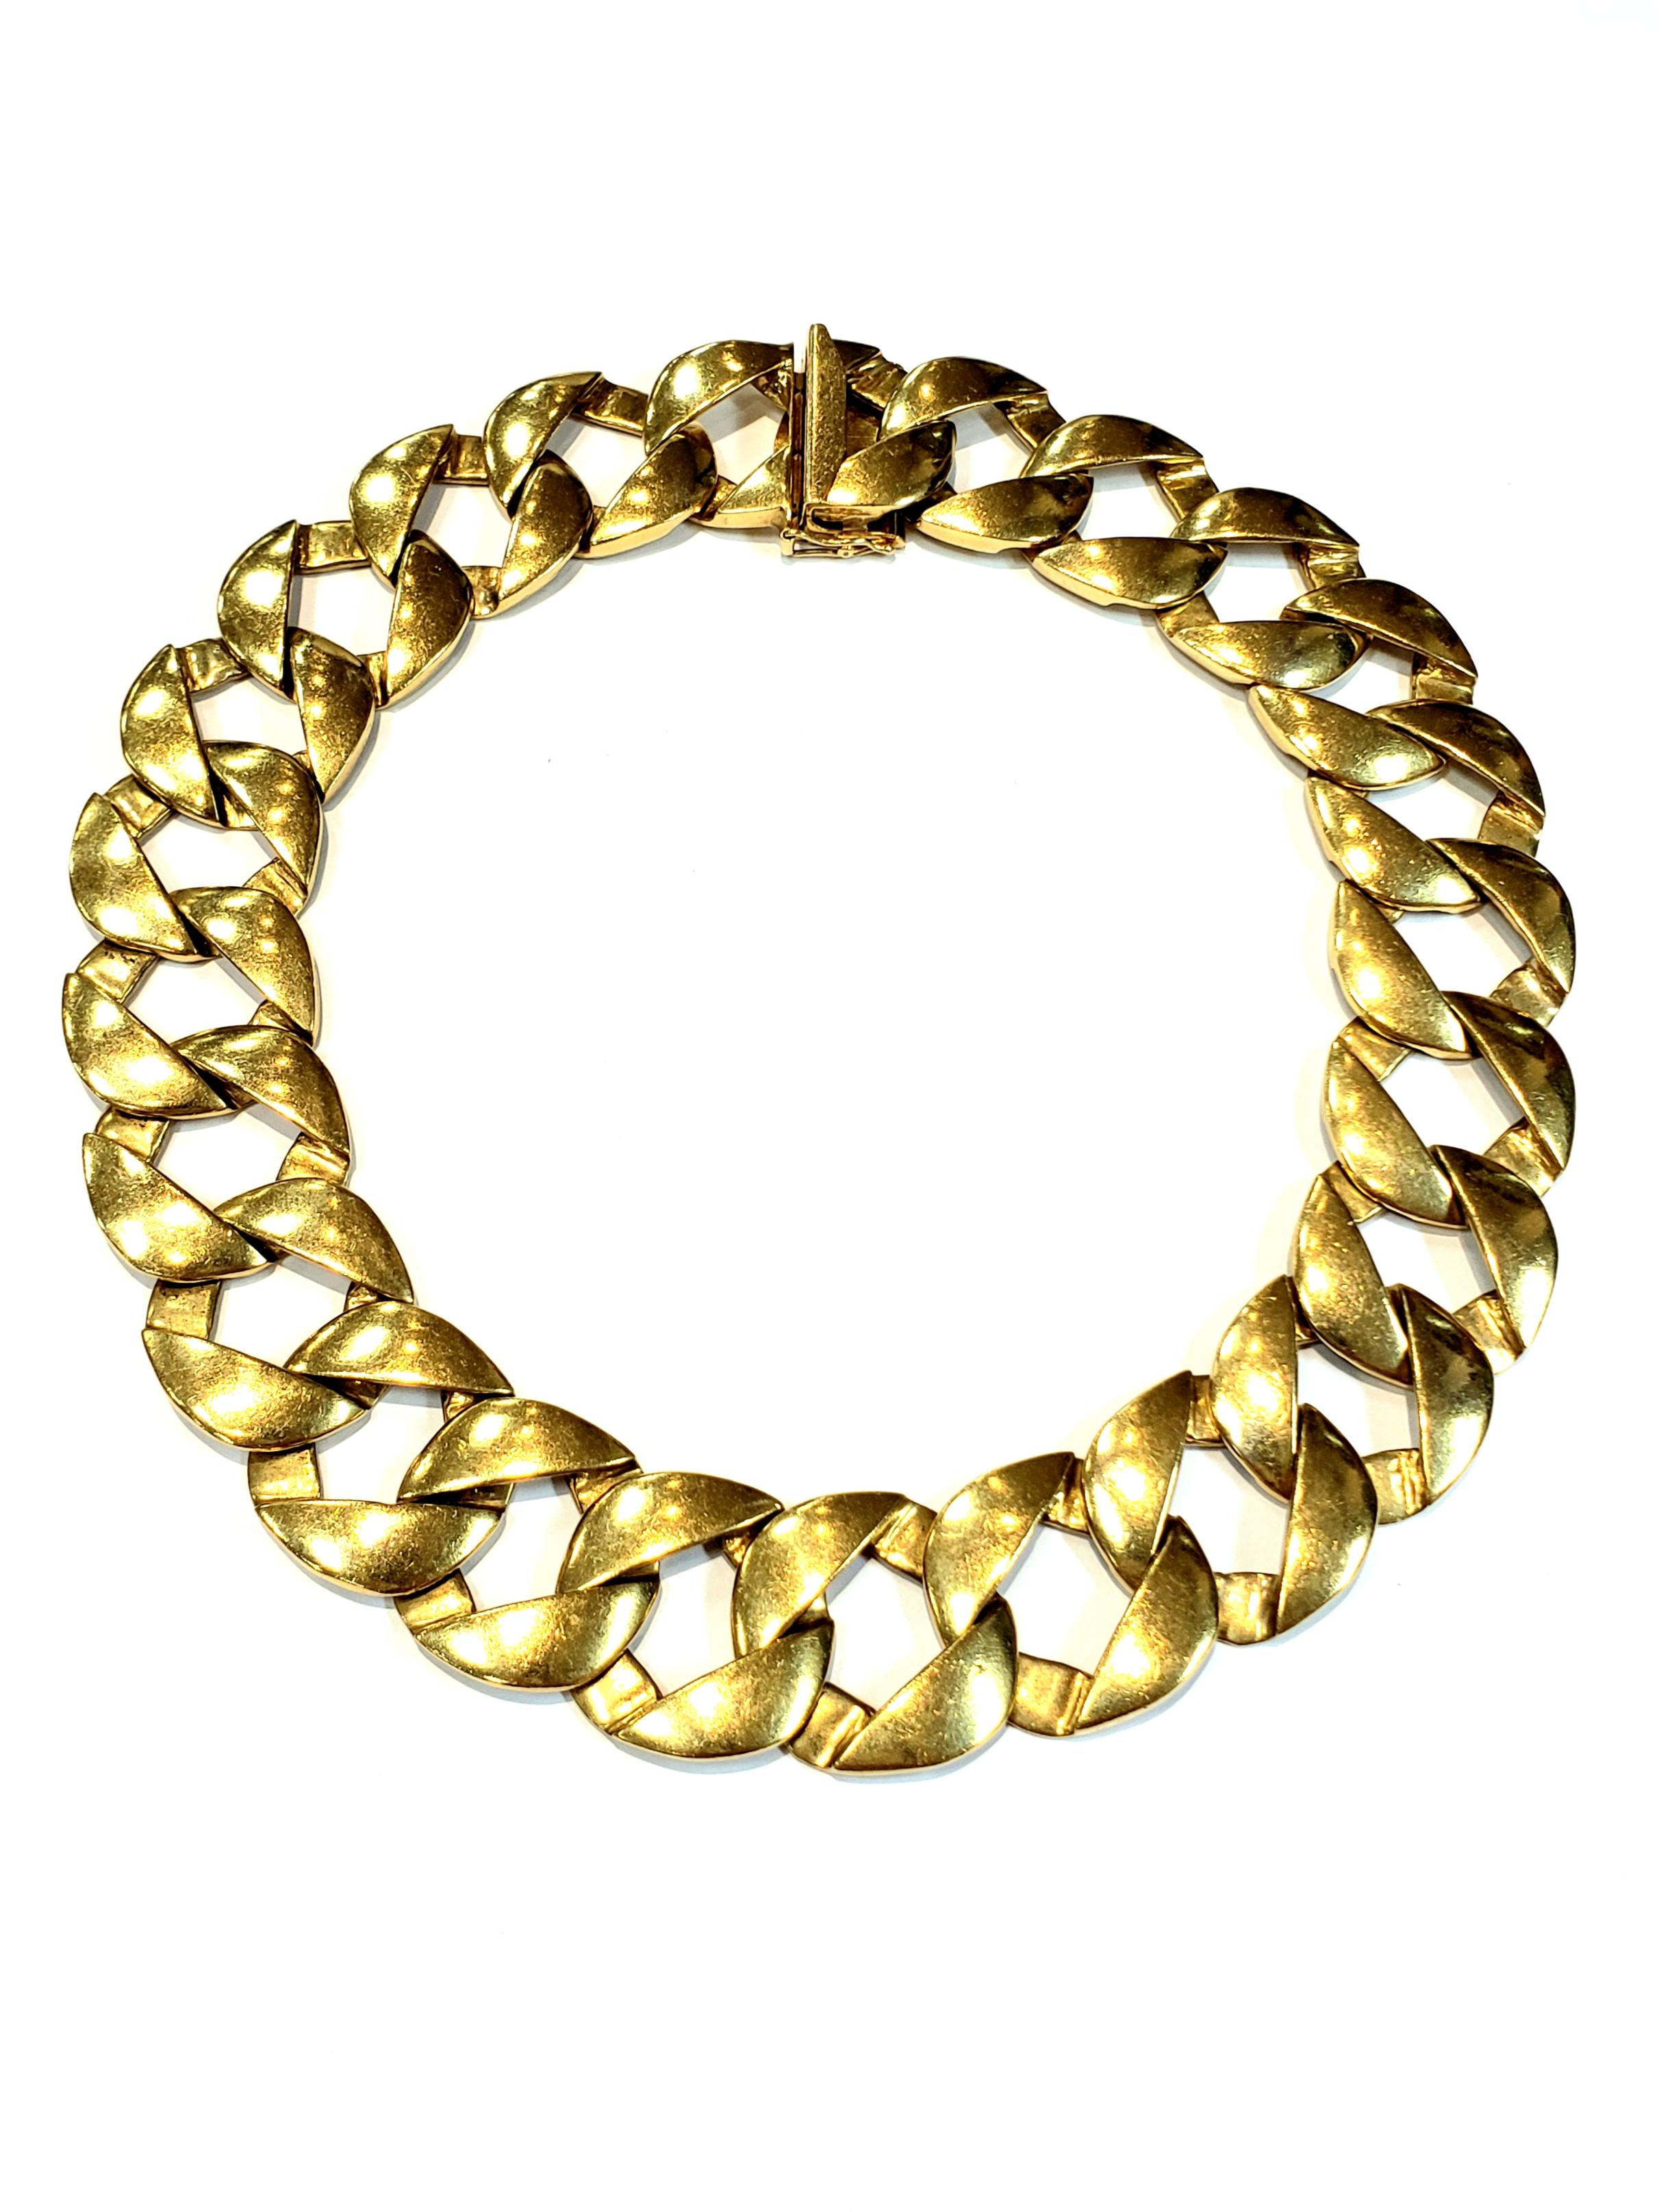 This Is a Classic 18 Karat Yellow Gold Round Open Link Necklace. Necklace Weighs 145 dwt.
Necklace Has Developed a Soft Patina From Wear. However It Can Be Polished To Look New.
Necklace is 16 Inch Choker Length.